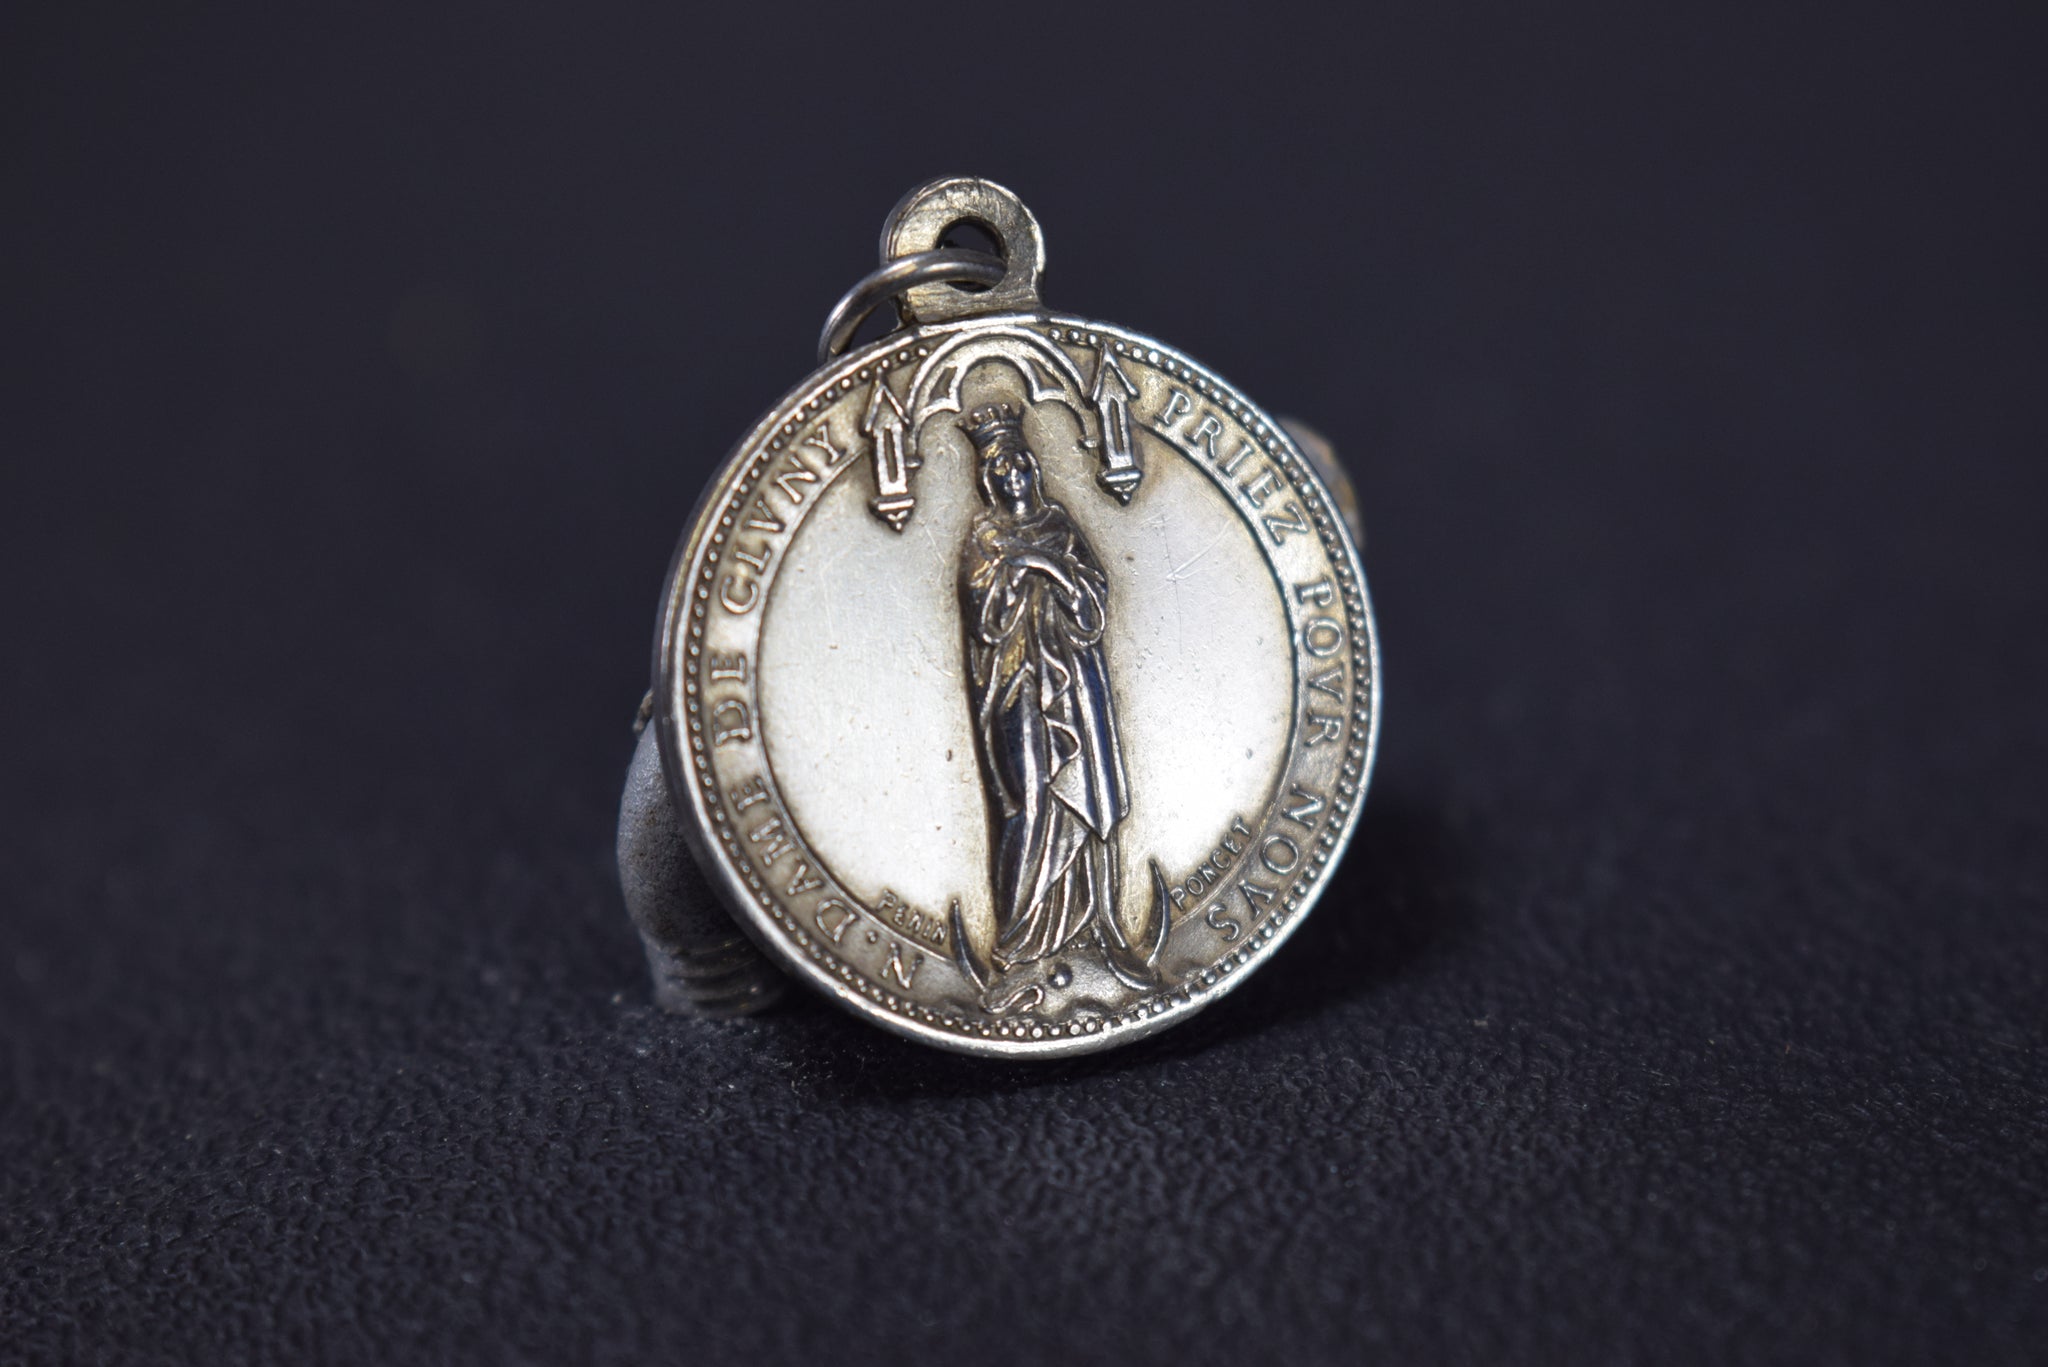 Blessed Lady of Cluny medal by Penin